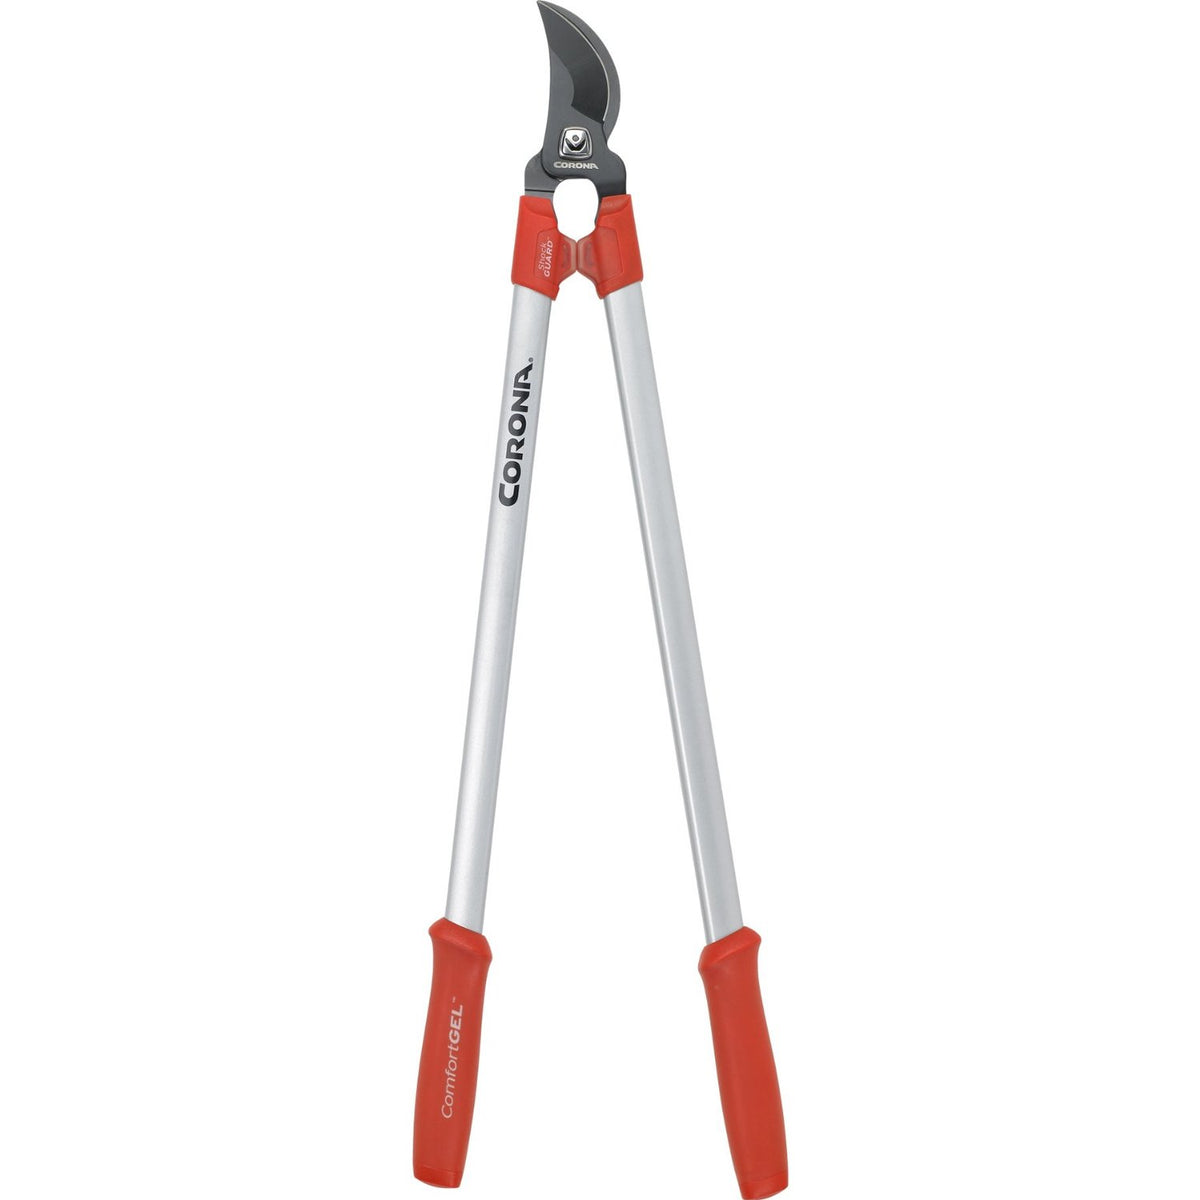 buy shears at cheap rate in bulk. wholesale & retail lawn & garden tools store.